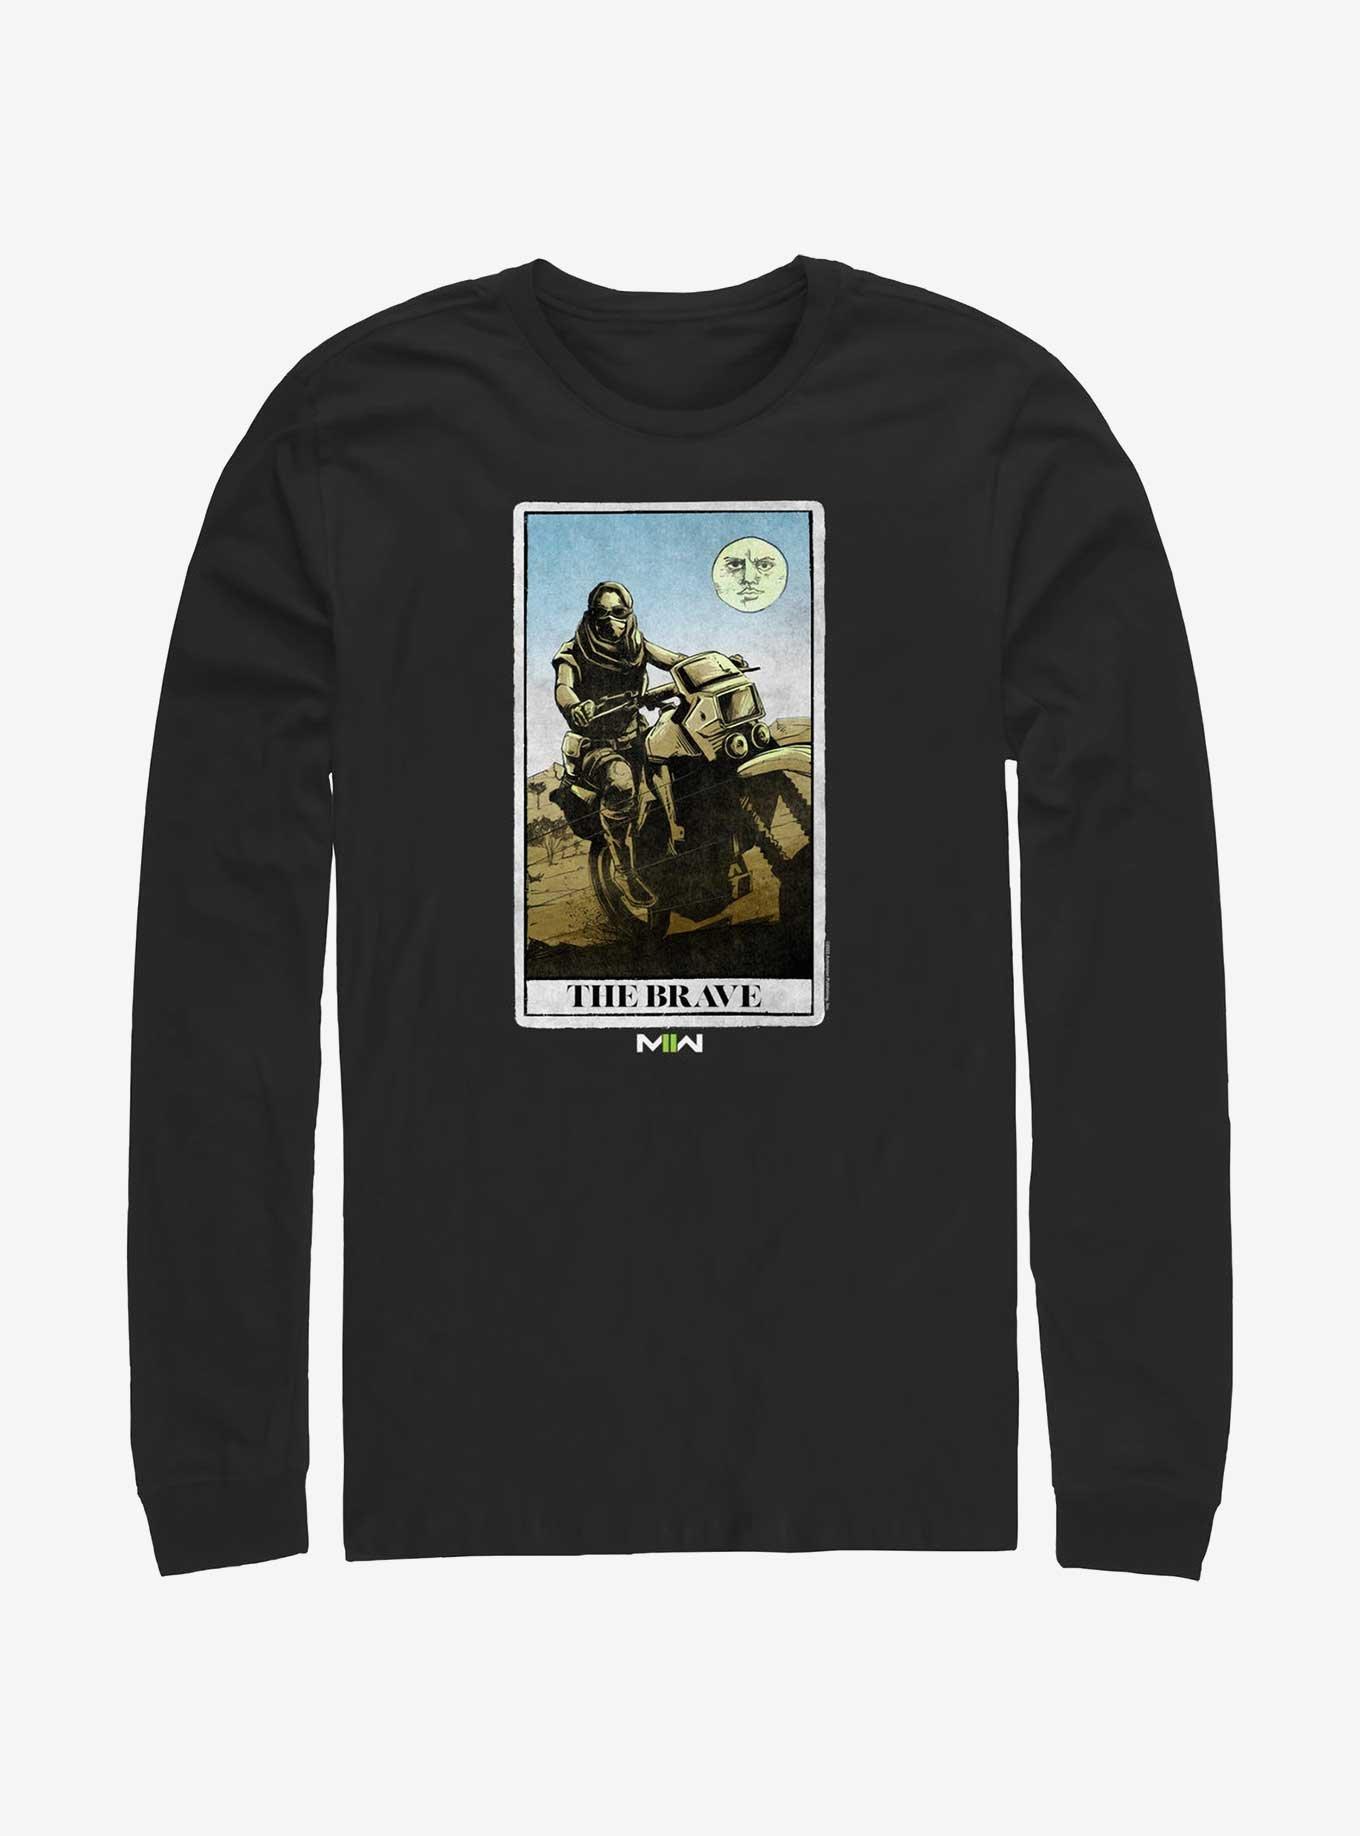 Call of Duty The Brave Card Long-Sleeve T-Shirt